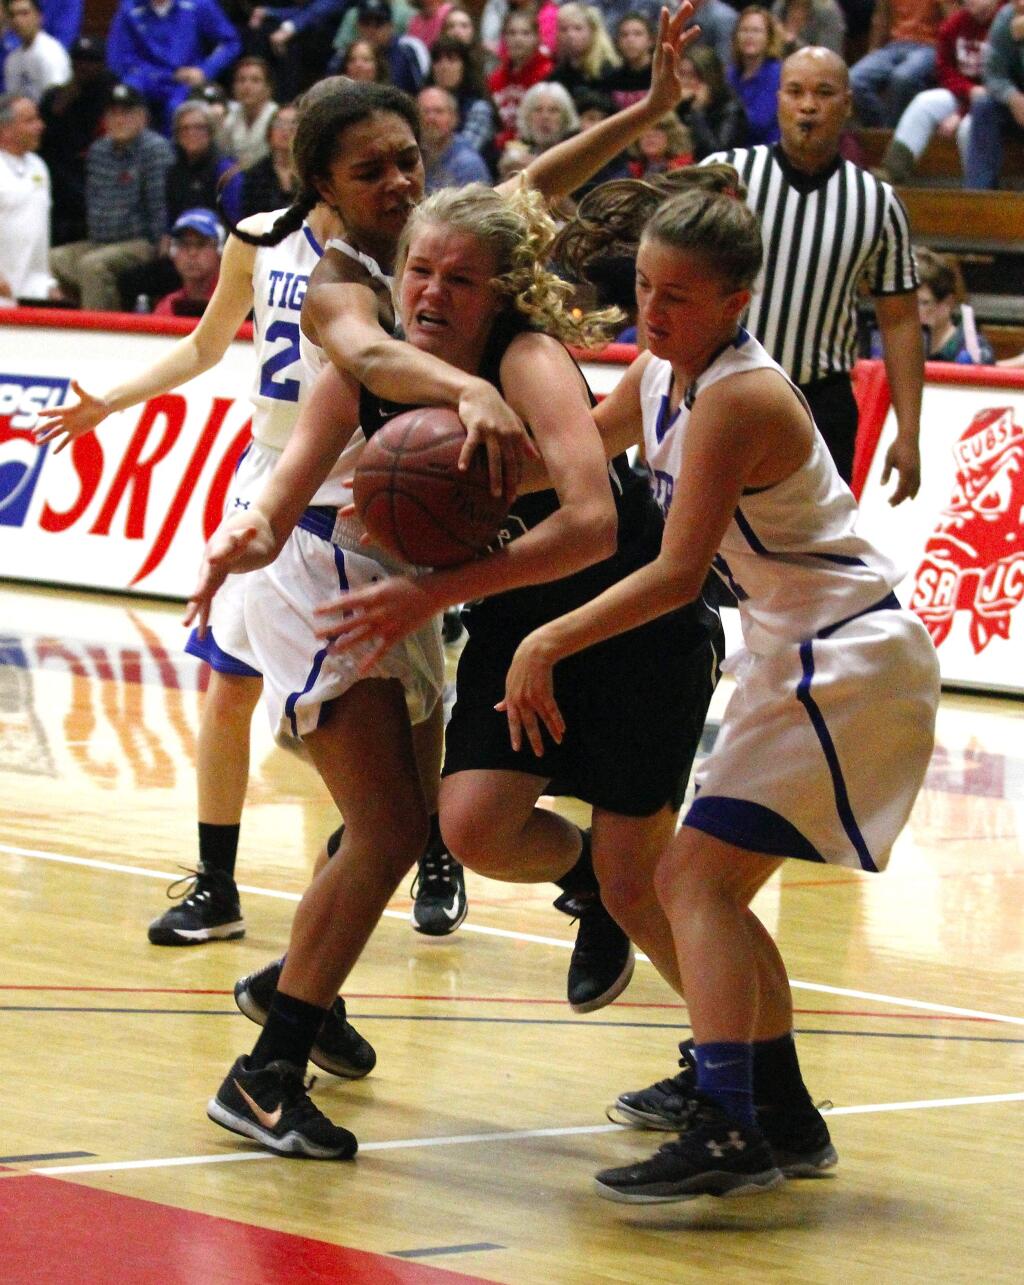 Sonoma's Grace Cutting gets fouled during the SCL tournament title game Feb. 20, 2016. Sonoma beat Analy 37-31 for the title.Photos by Bill Hoban/Index-Tribune